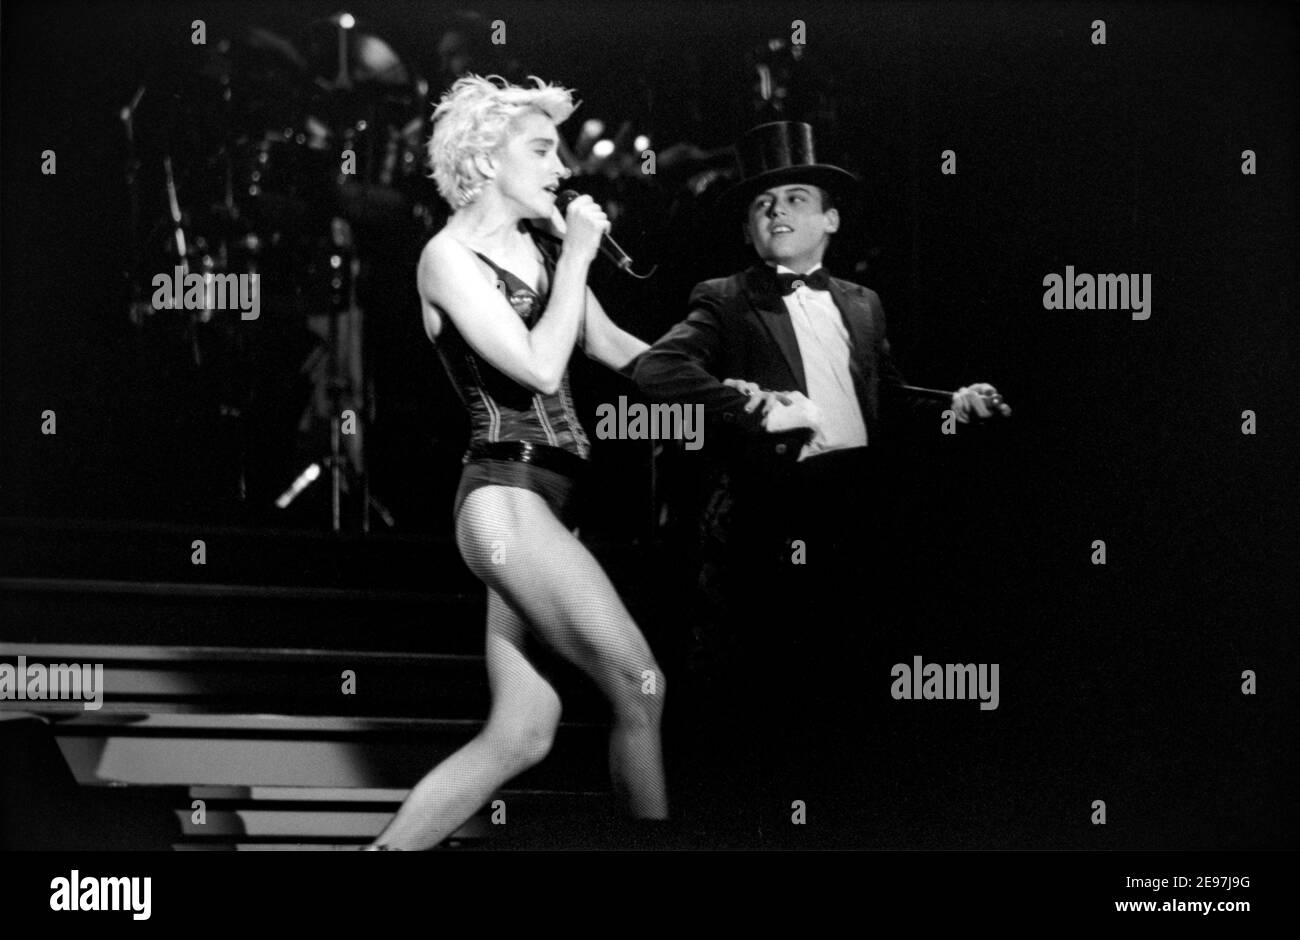 ROTTERDAM, THE NETHERLANDS - AUG 25,1987: Madonna live on stage during her “who’s that girl” world tour. Stock Photo